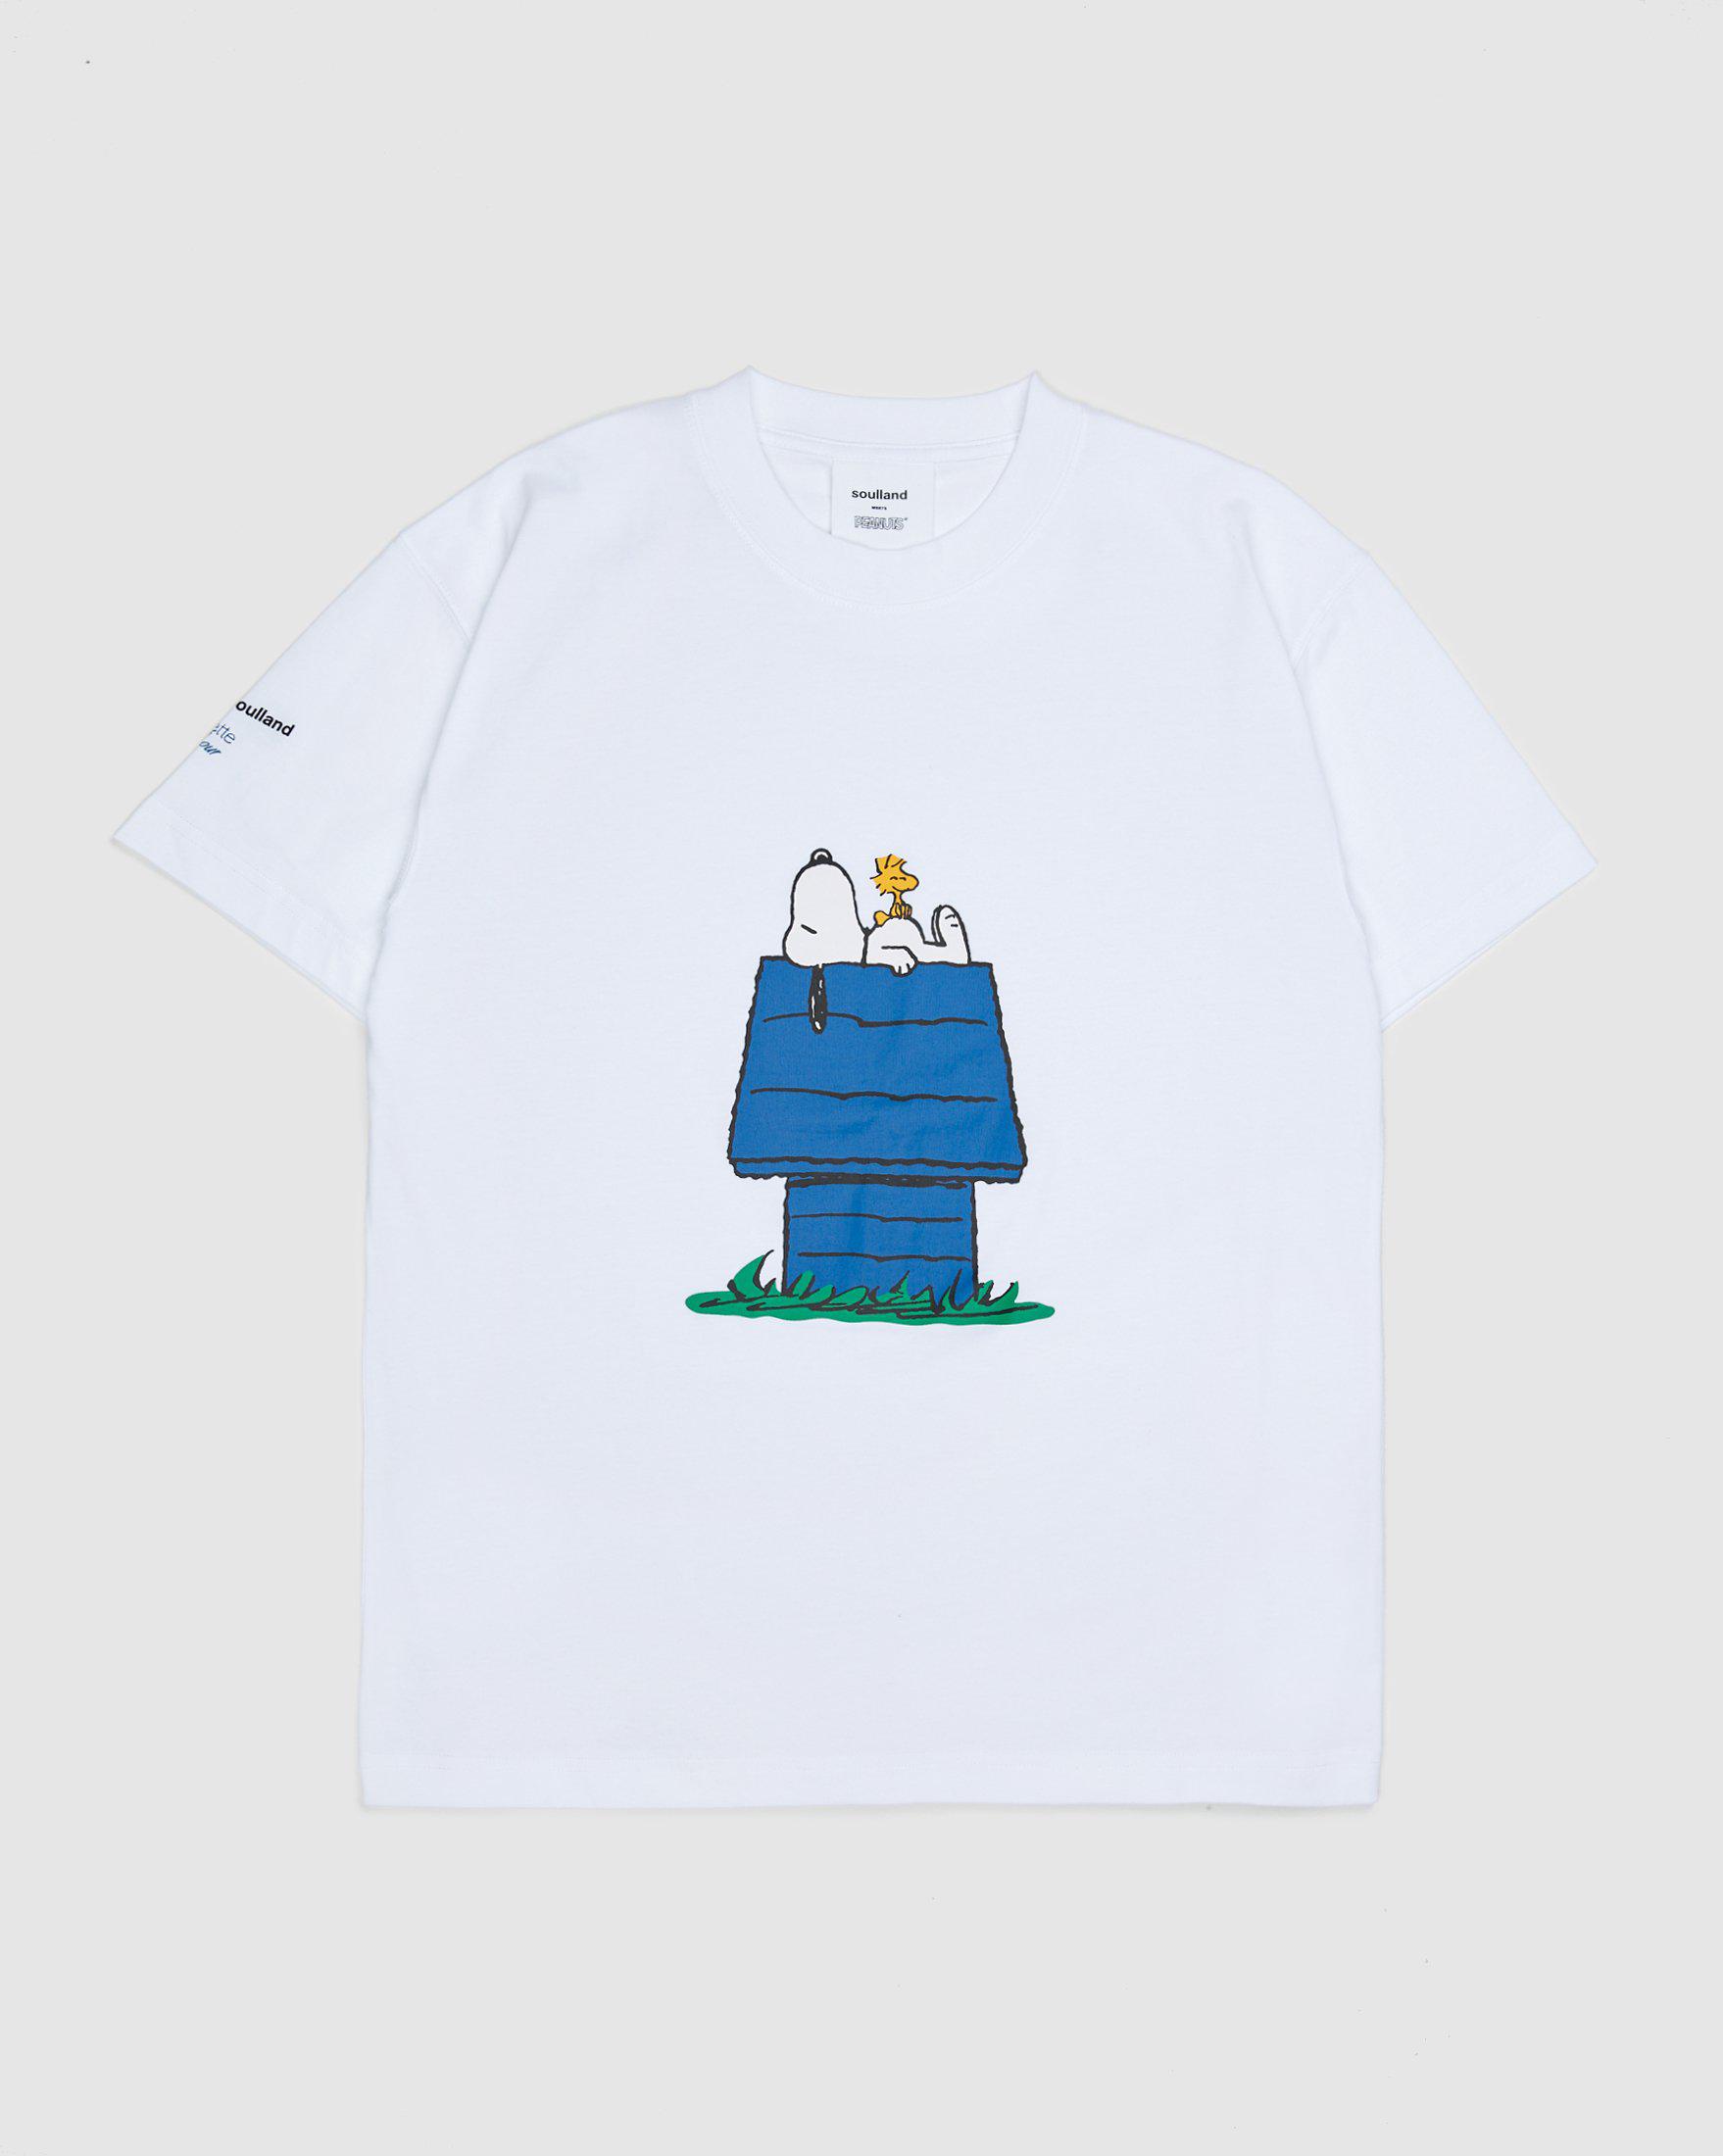 Colette Mon Amour x Soulland – Snoopy Bed White T-Shirt by COLETTE MON AMOUR X SOULLAND